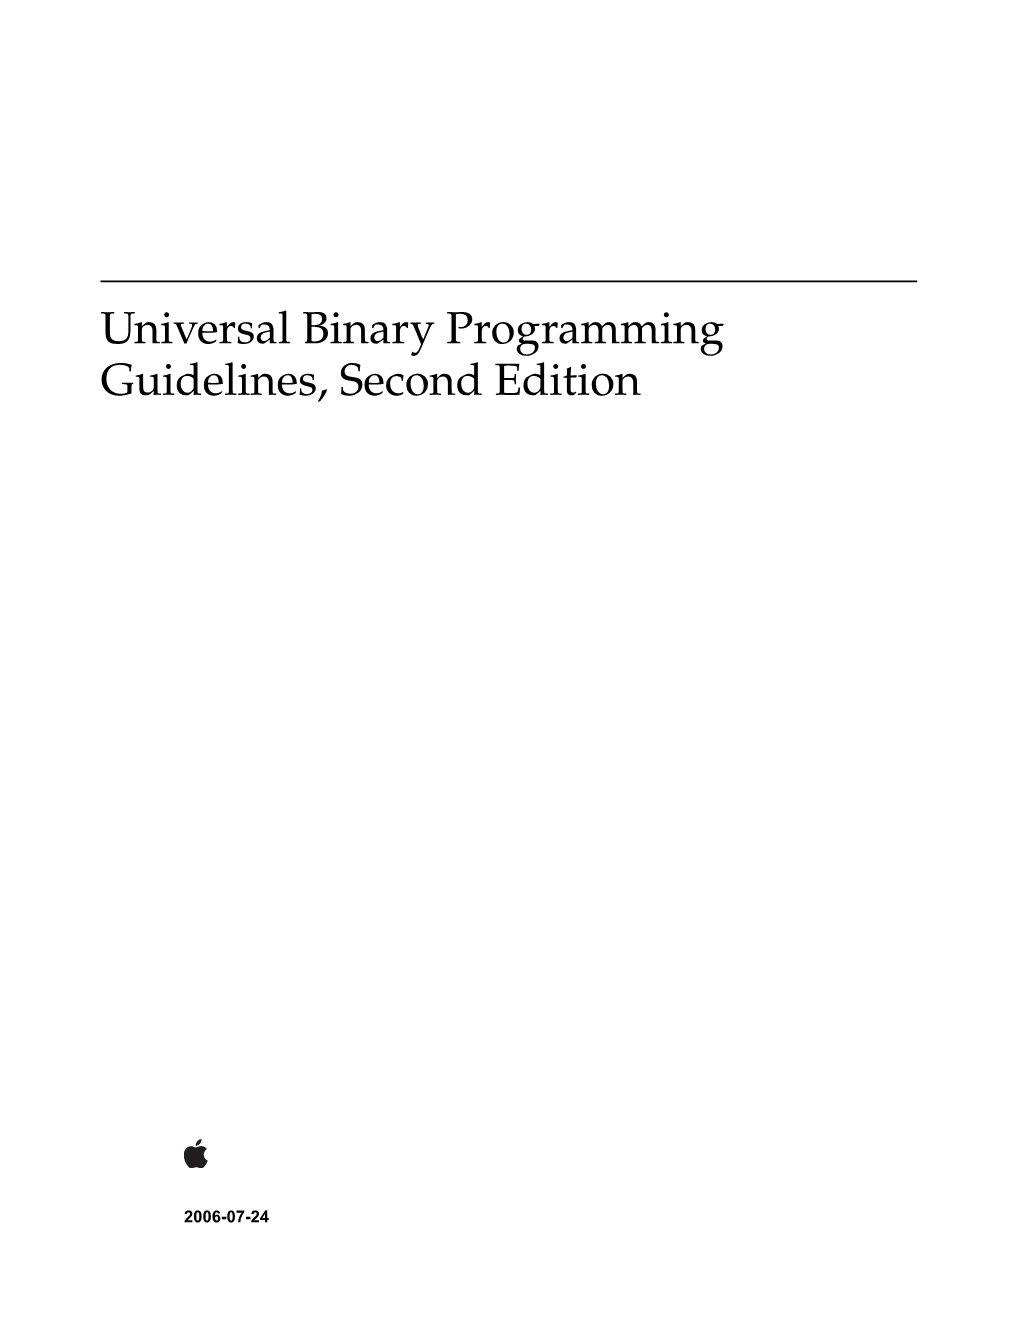 Universal Binary Programming Guidelines, Second Edition